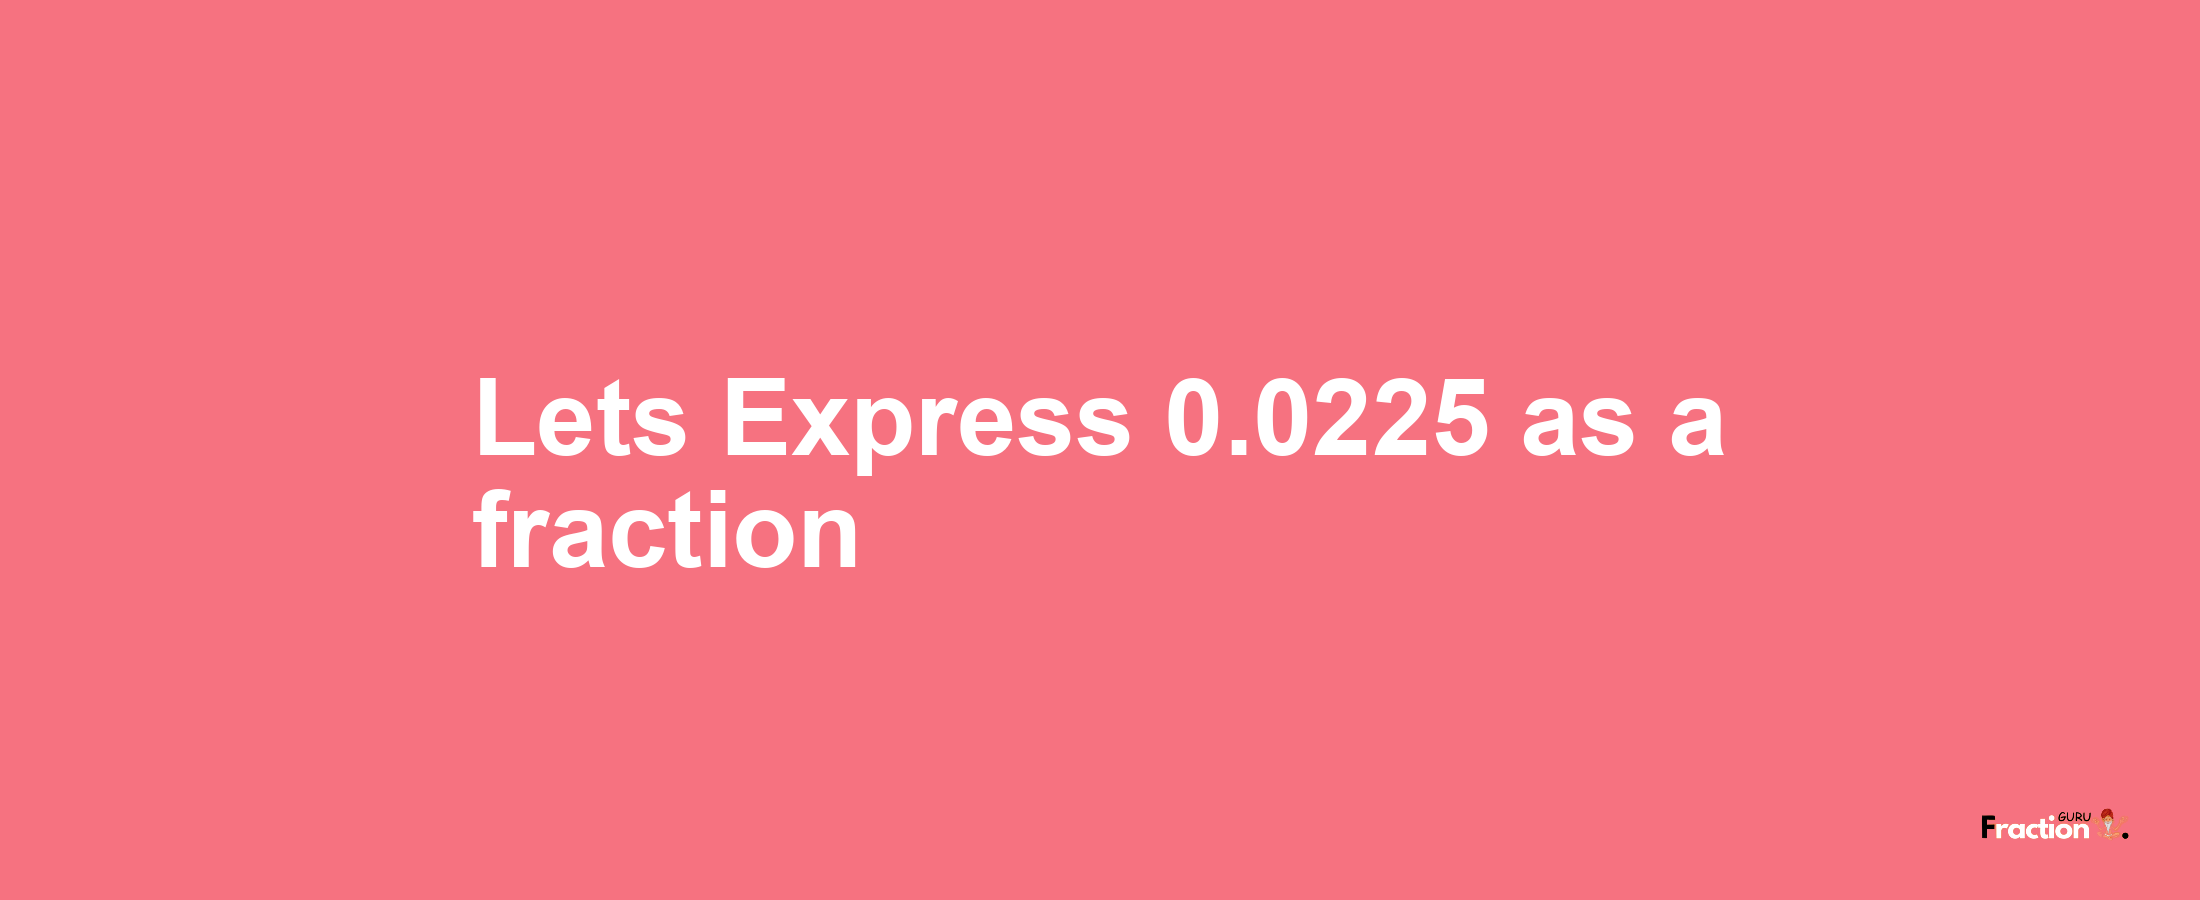 Lets Express 0.0225 as afraction